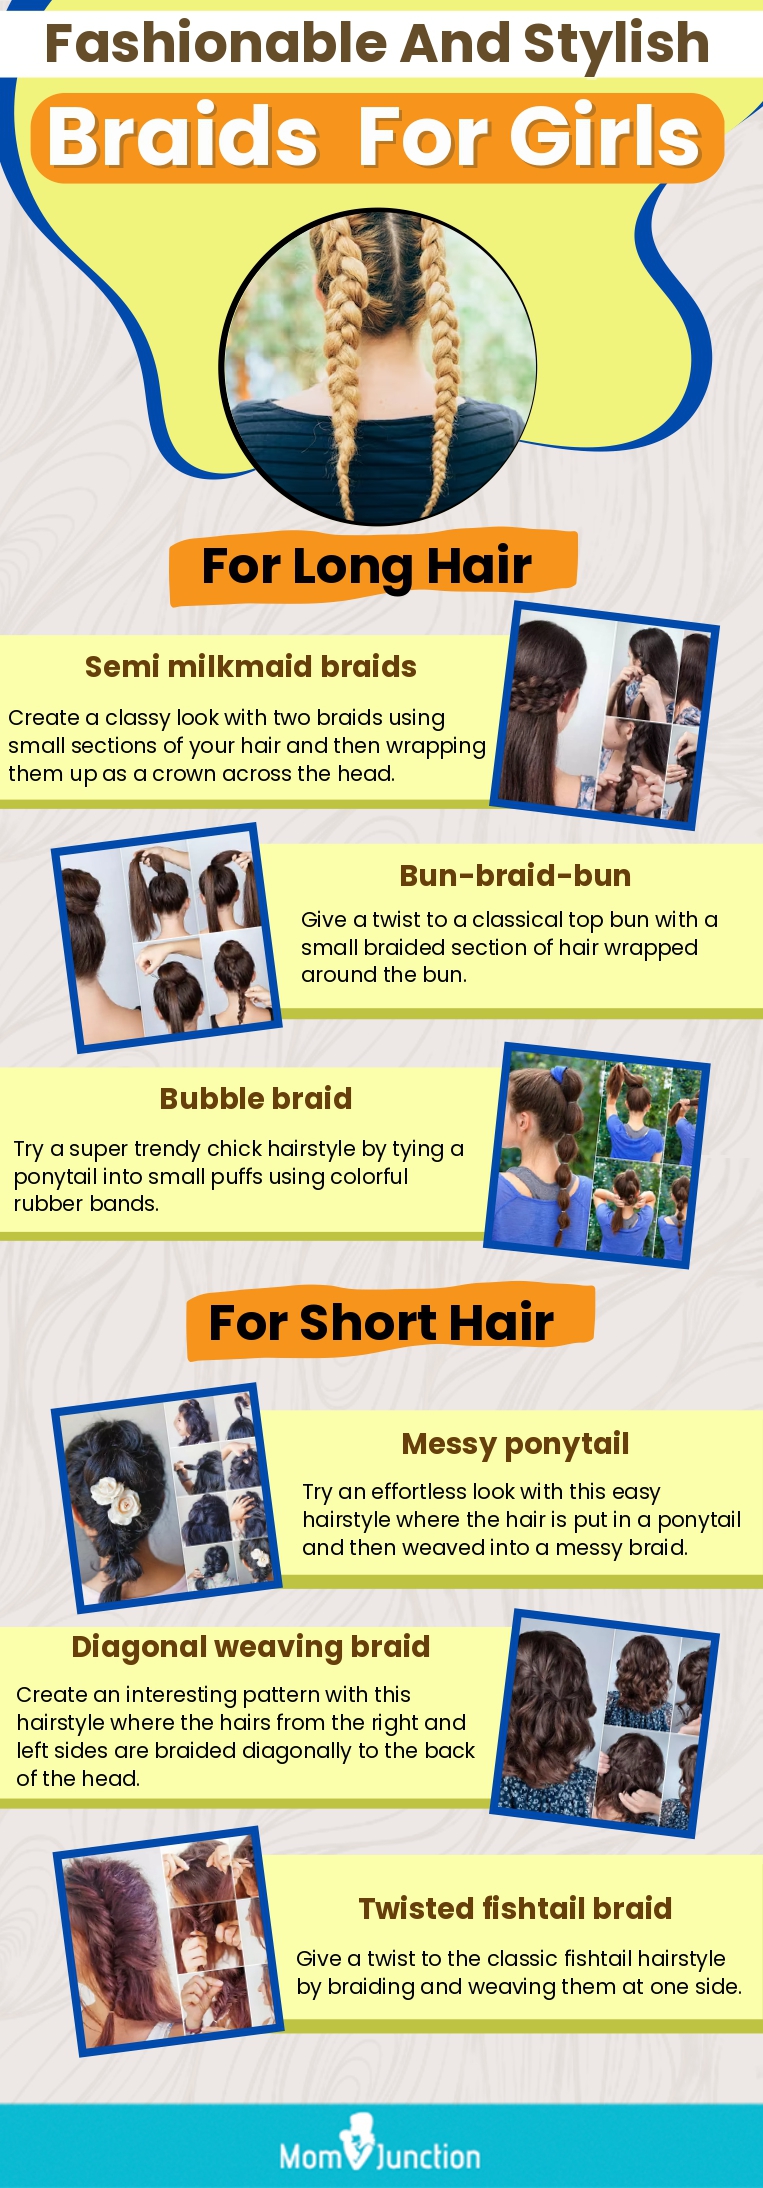 fashionable and stylish braids for girls (infographic)